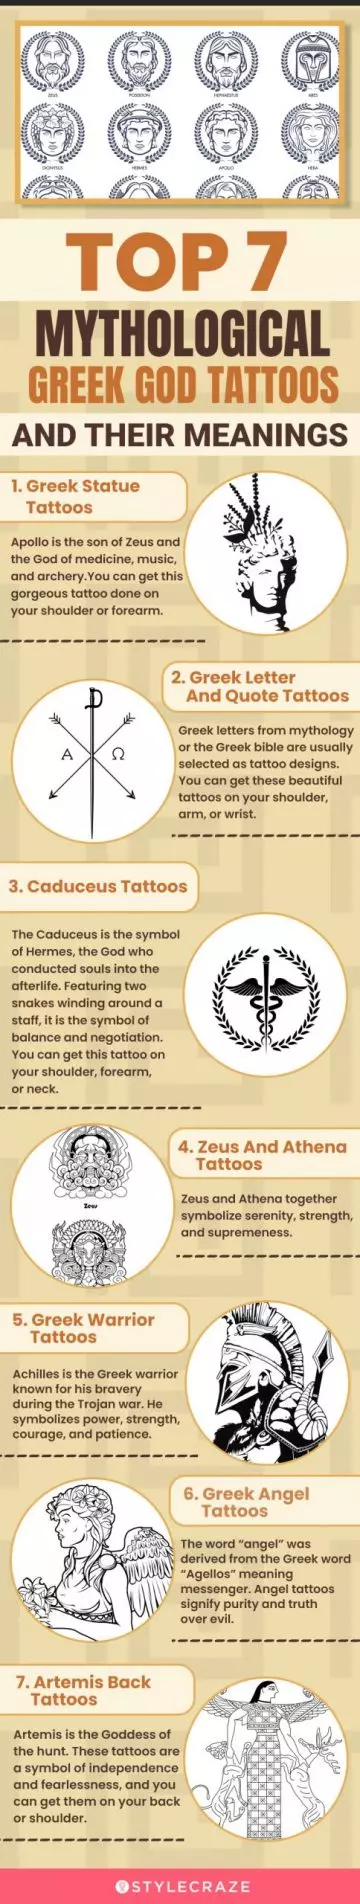 top 7 mythological greek god tattoos and their meanings (infographic)